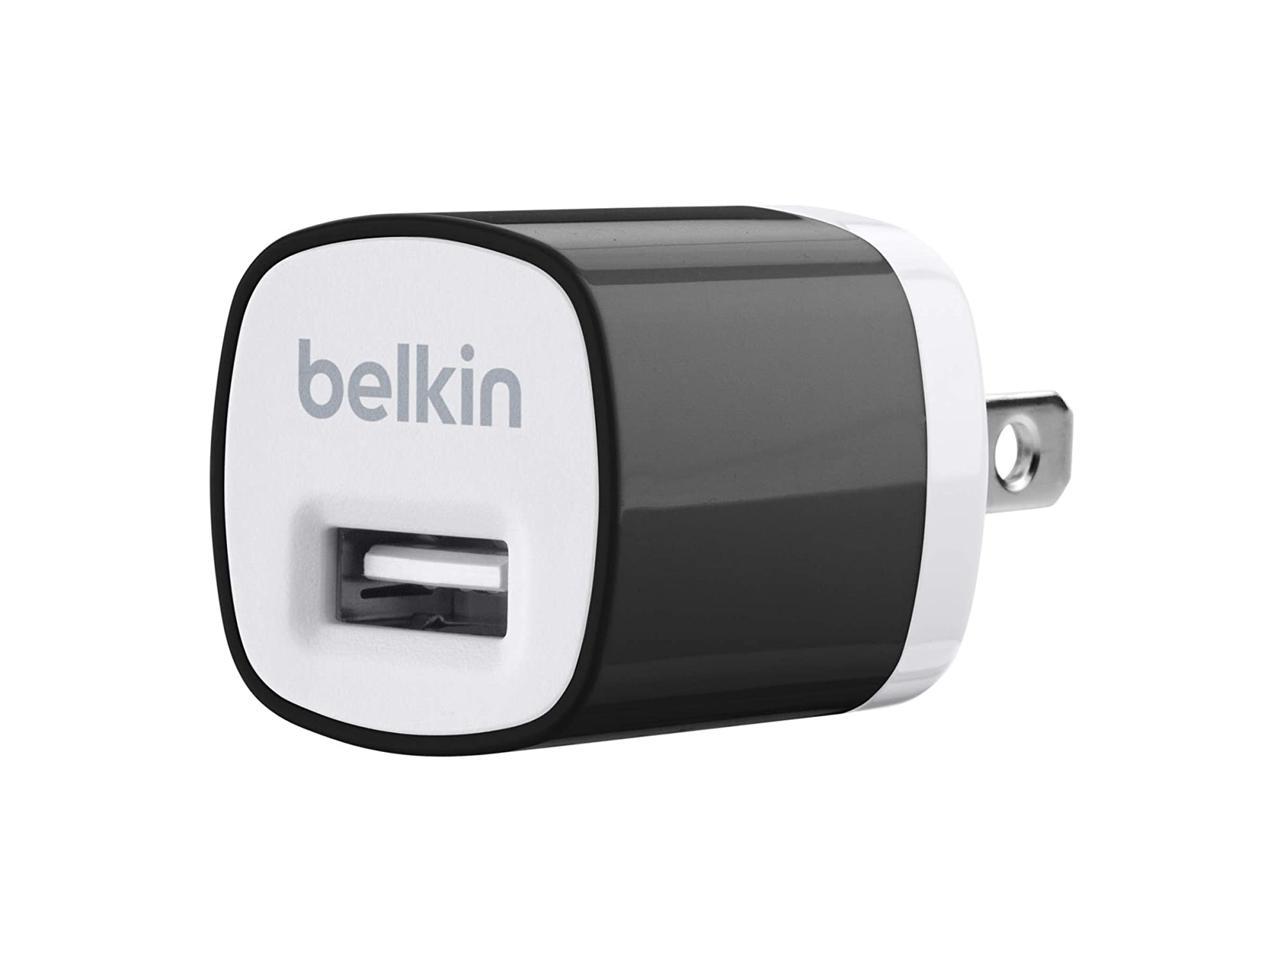 Belkin MiXiT Home and Travel Wall Charger with USB Port - 1 AMP / 5 Watt (Black) - F8J017ttBLK